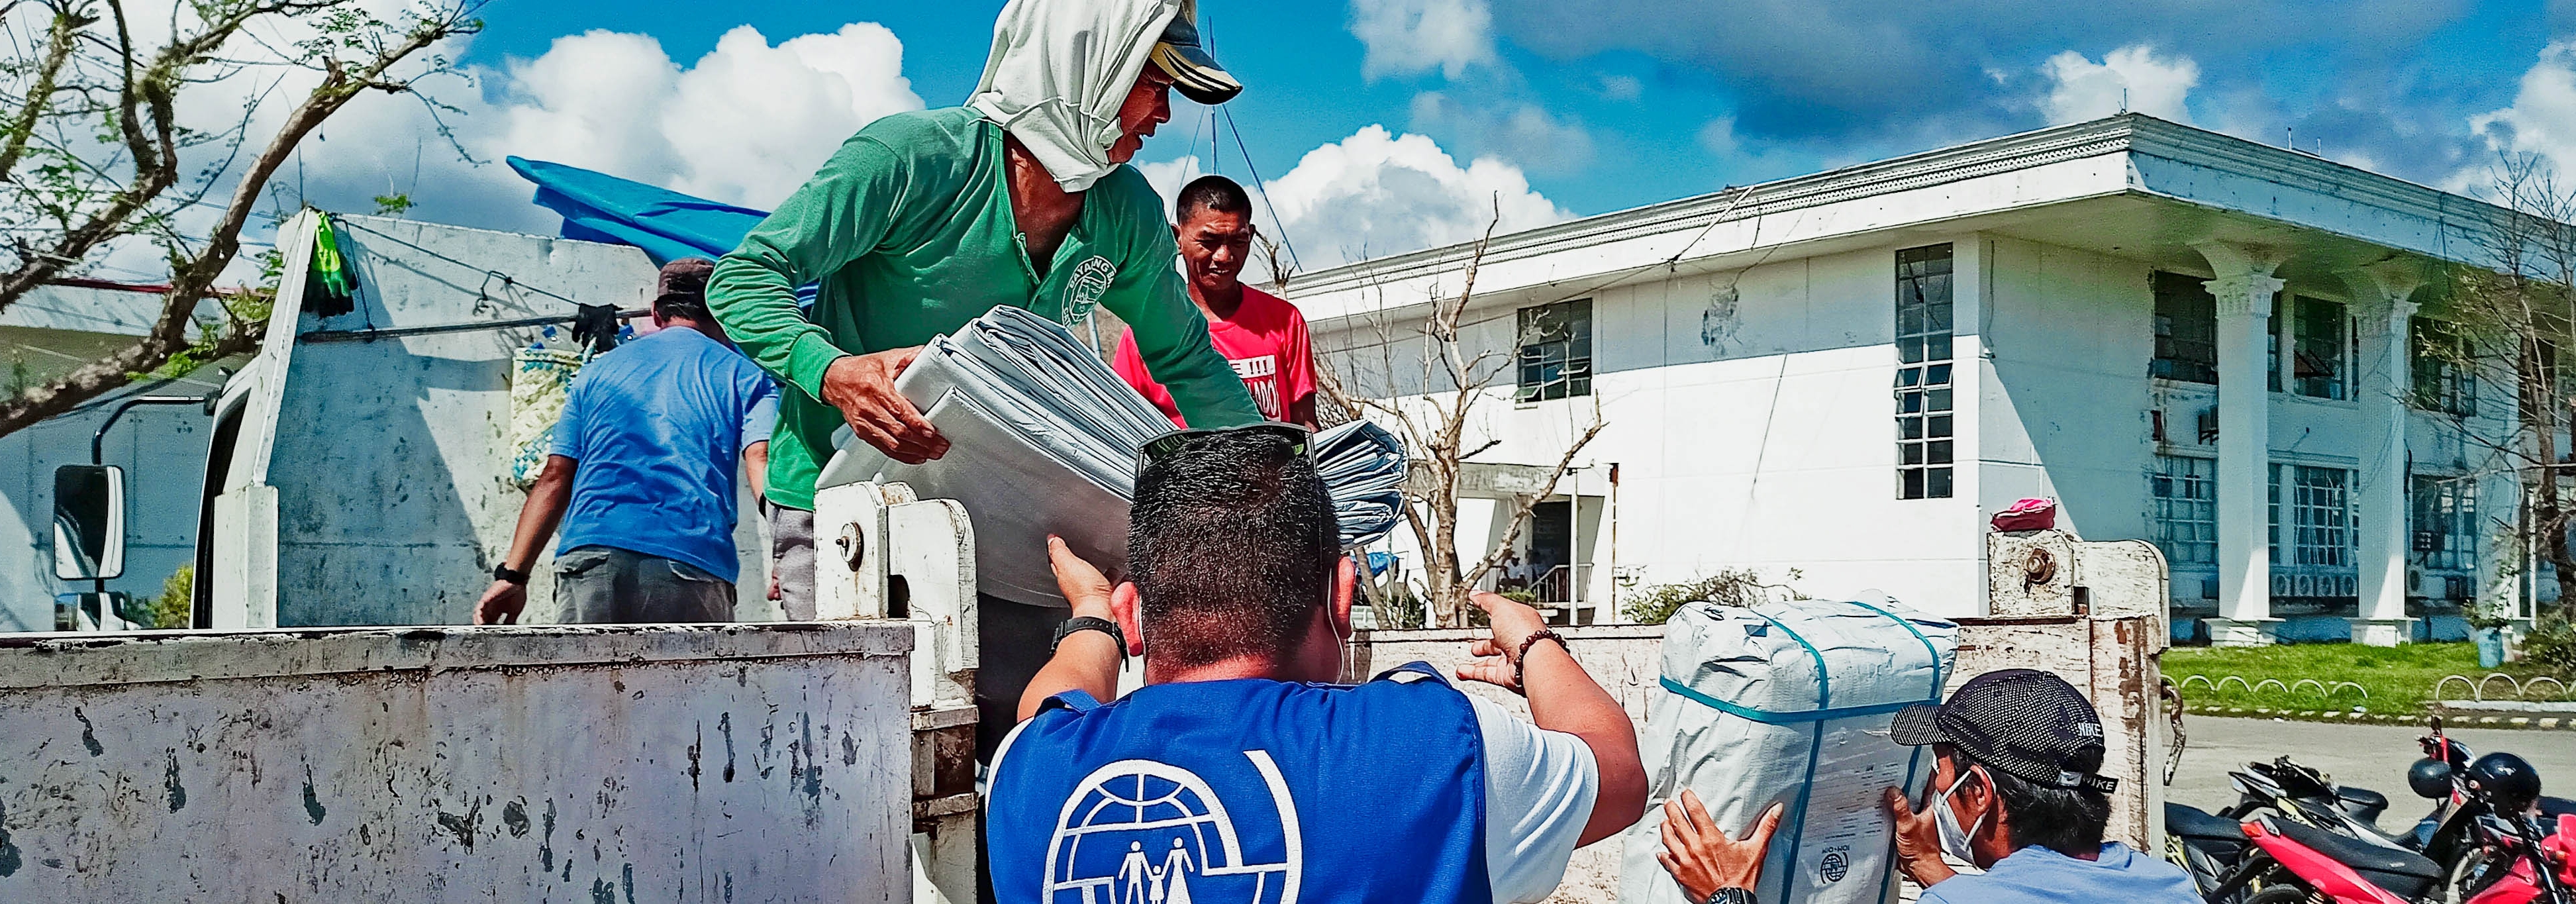 IOM teams on the ground in Catanduanes, Bicol region unload shelter grade tarps to be distributed to the most vulnerable communities affected by Super Typhoon Goni